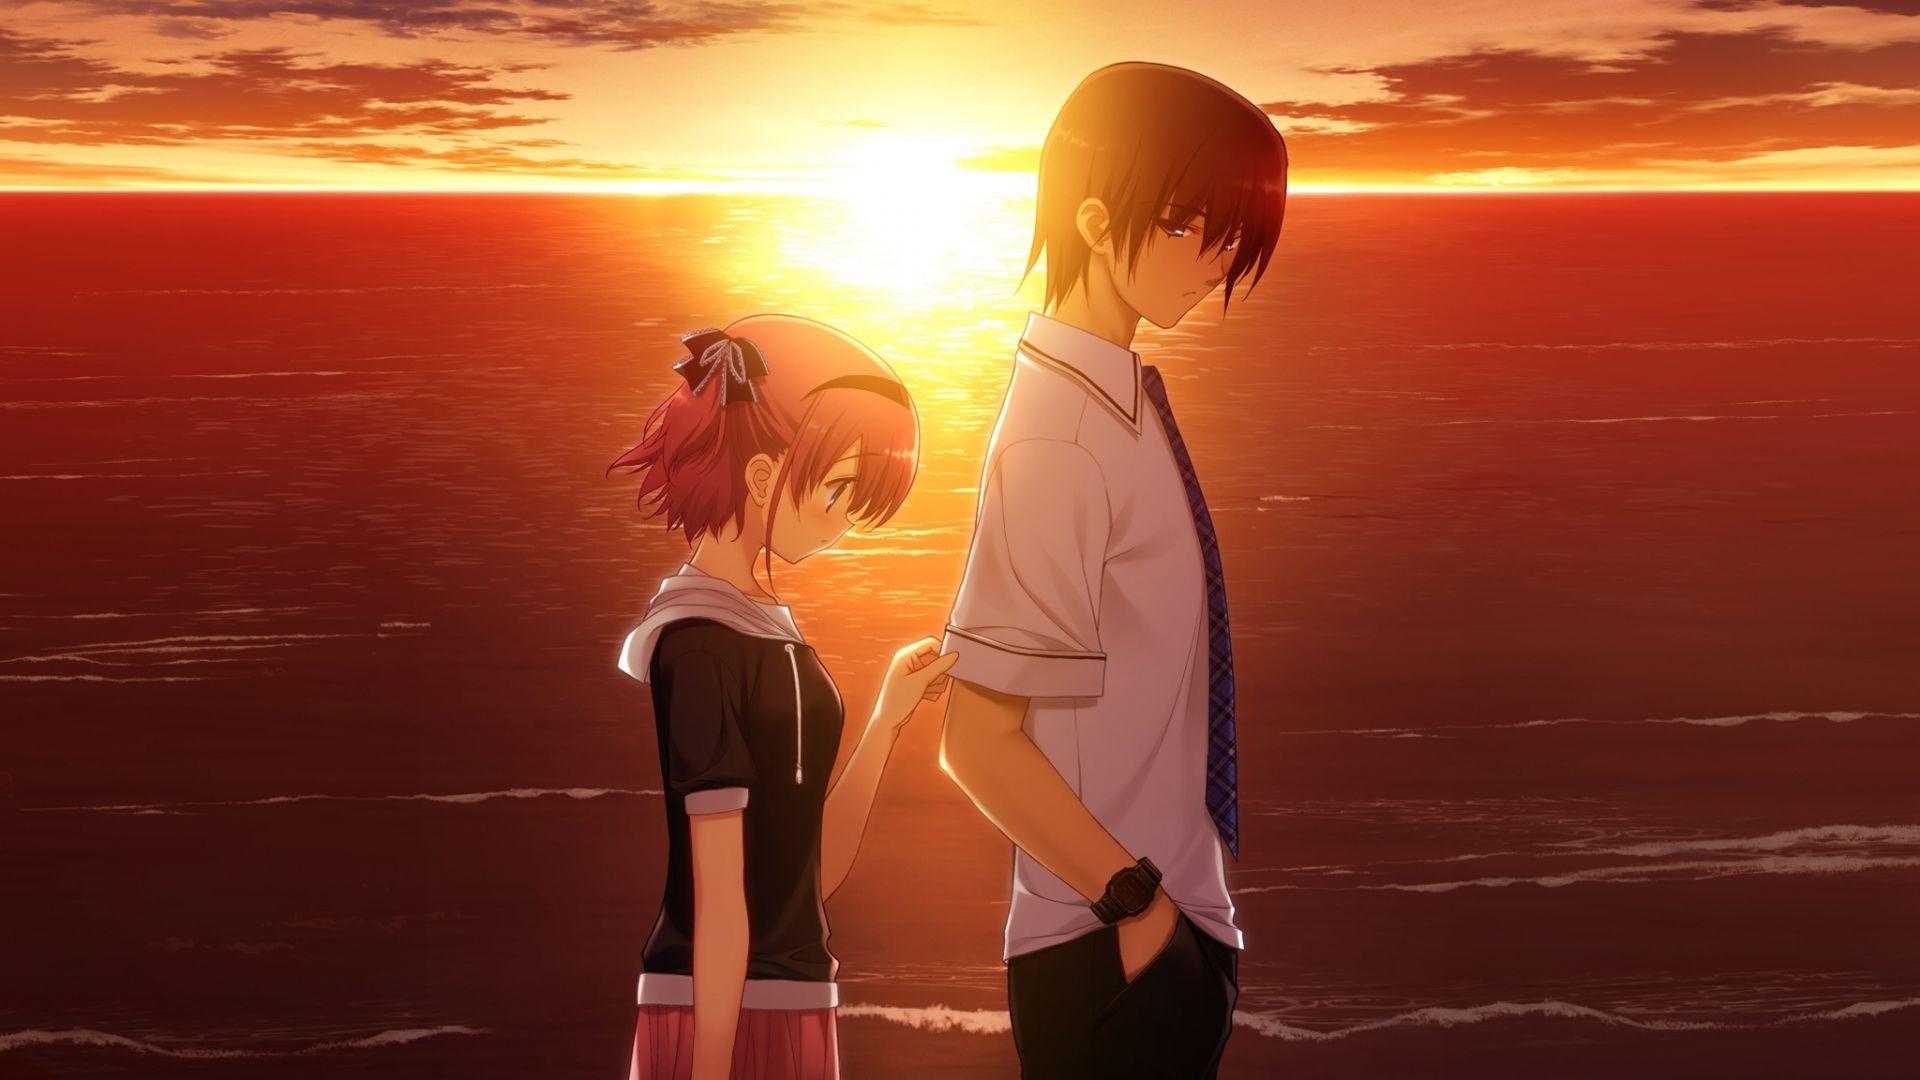 Love the sunset mood night Anime two